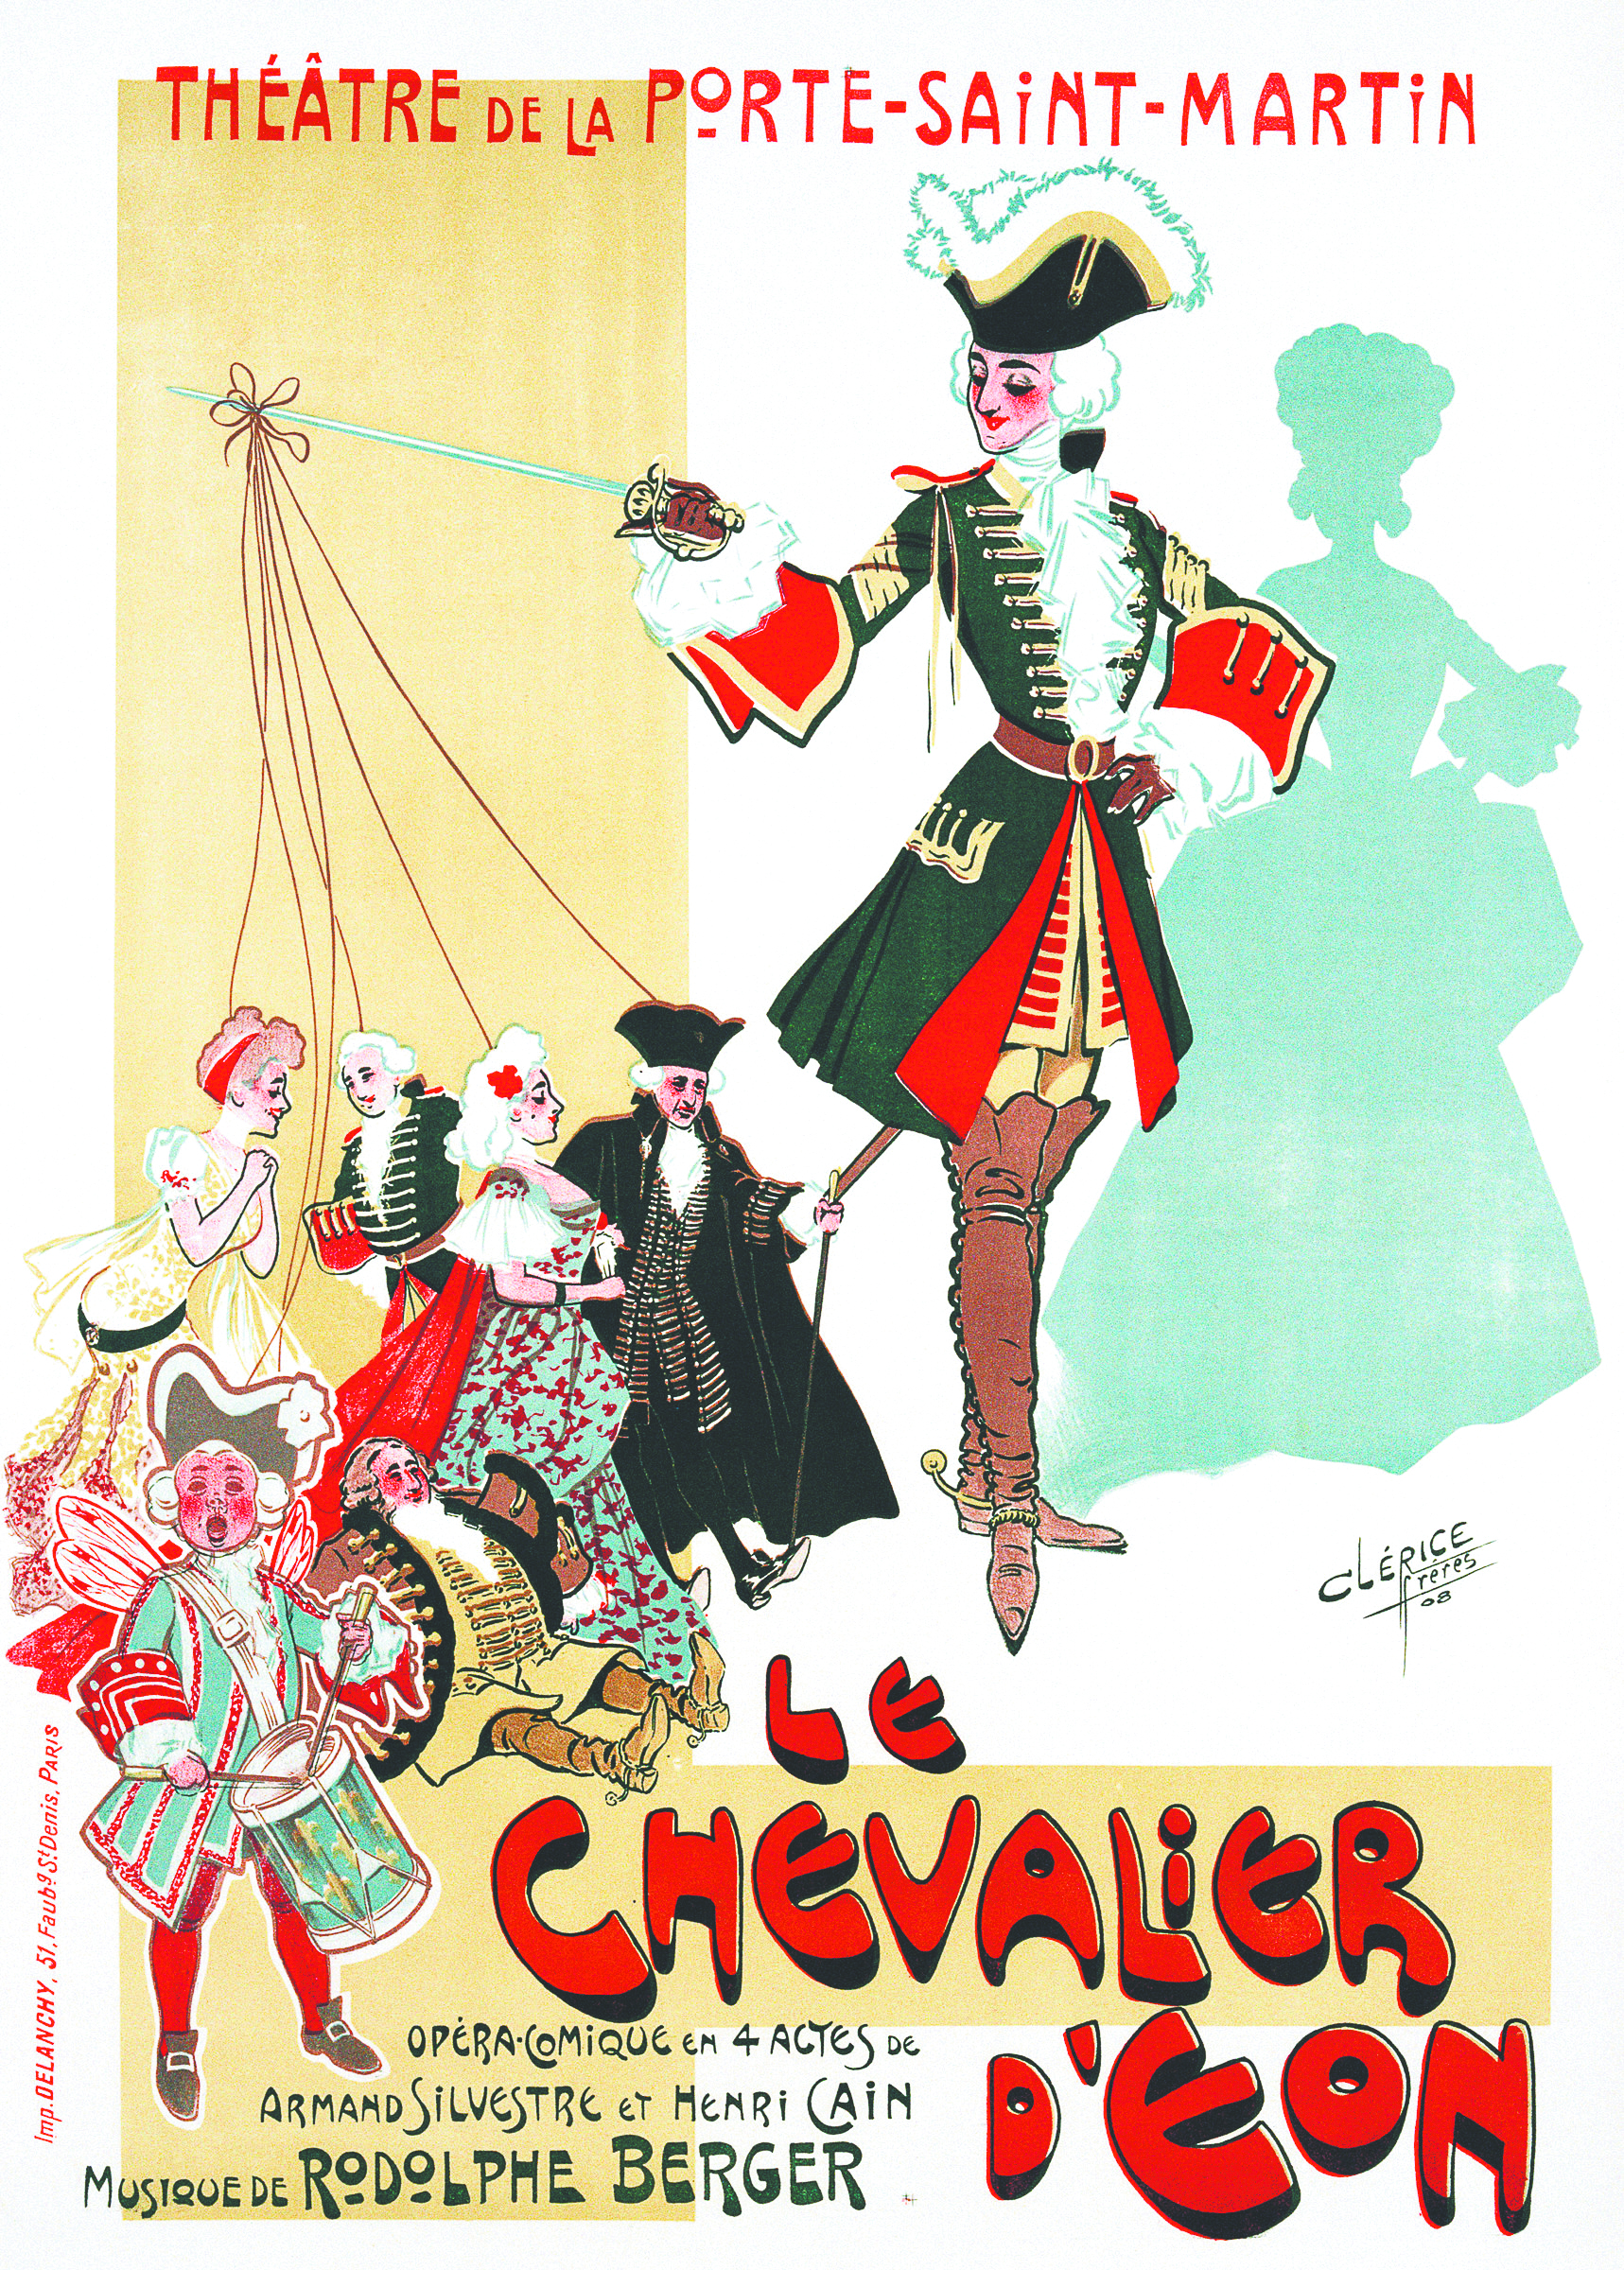 Poster for Opera by Francois and Victor Clerice